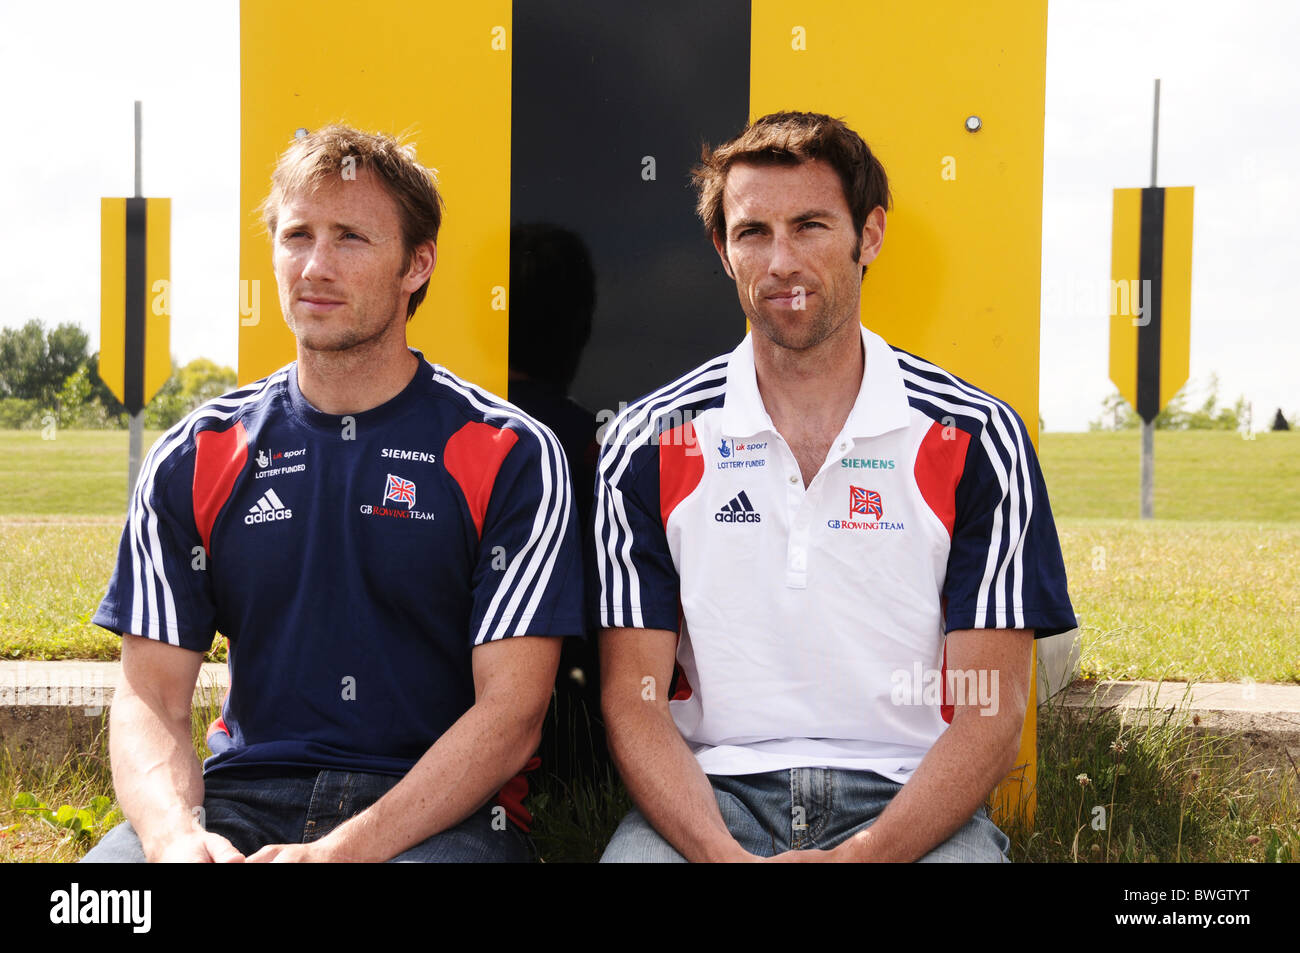 Rowing brothers Ross Hunter (left) and Mark Hunter MBE prepare for 2012 Olympics at start on Dorney Lake GB rowing venue in 2012 Stock Photo